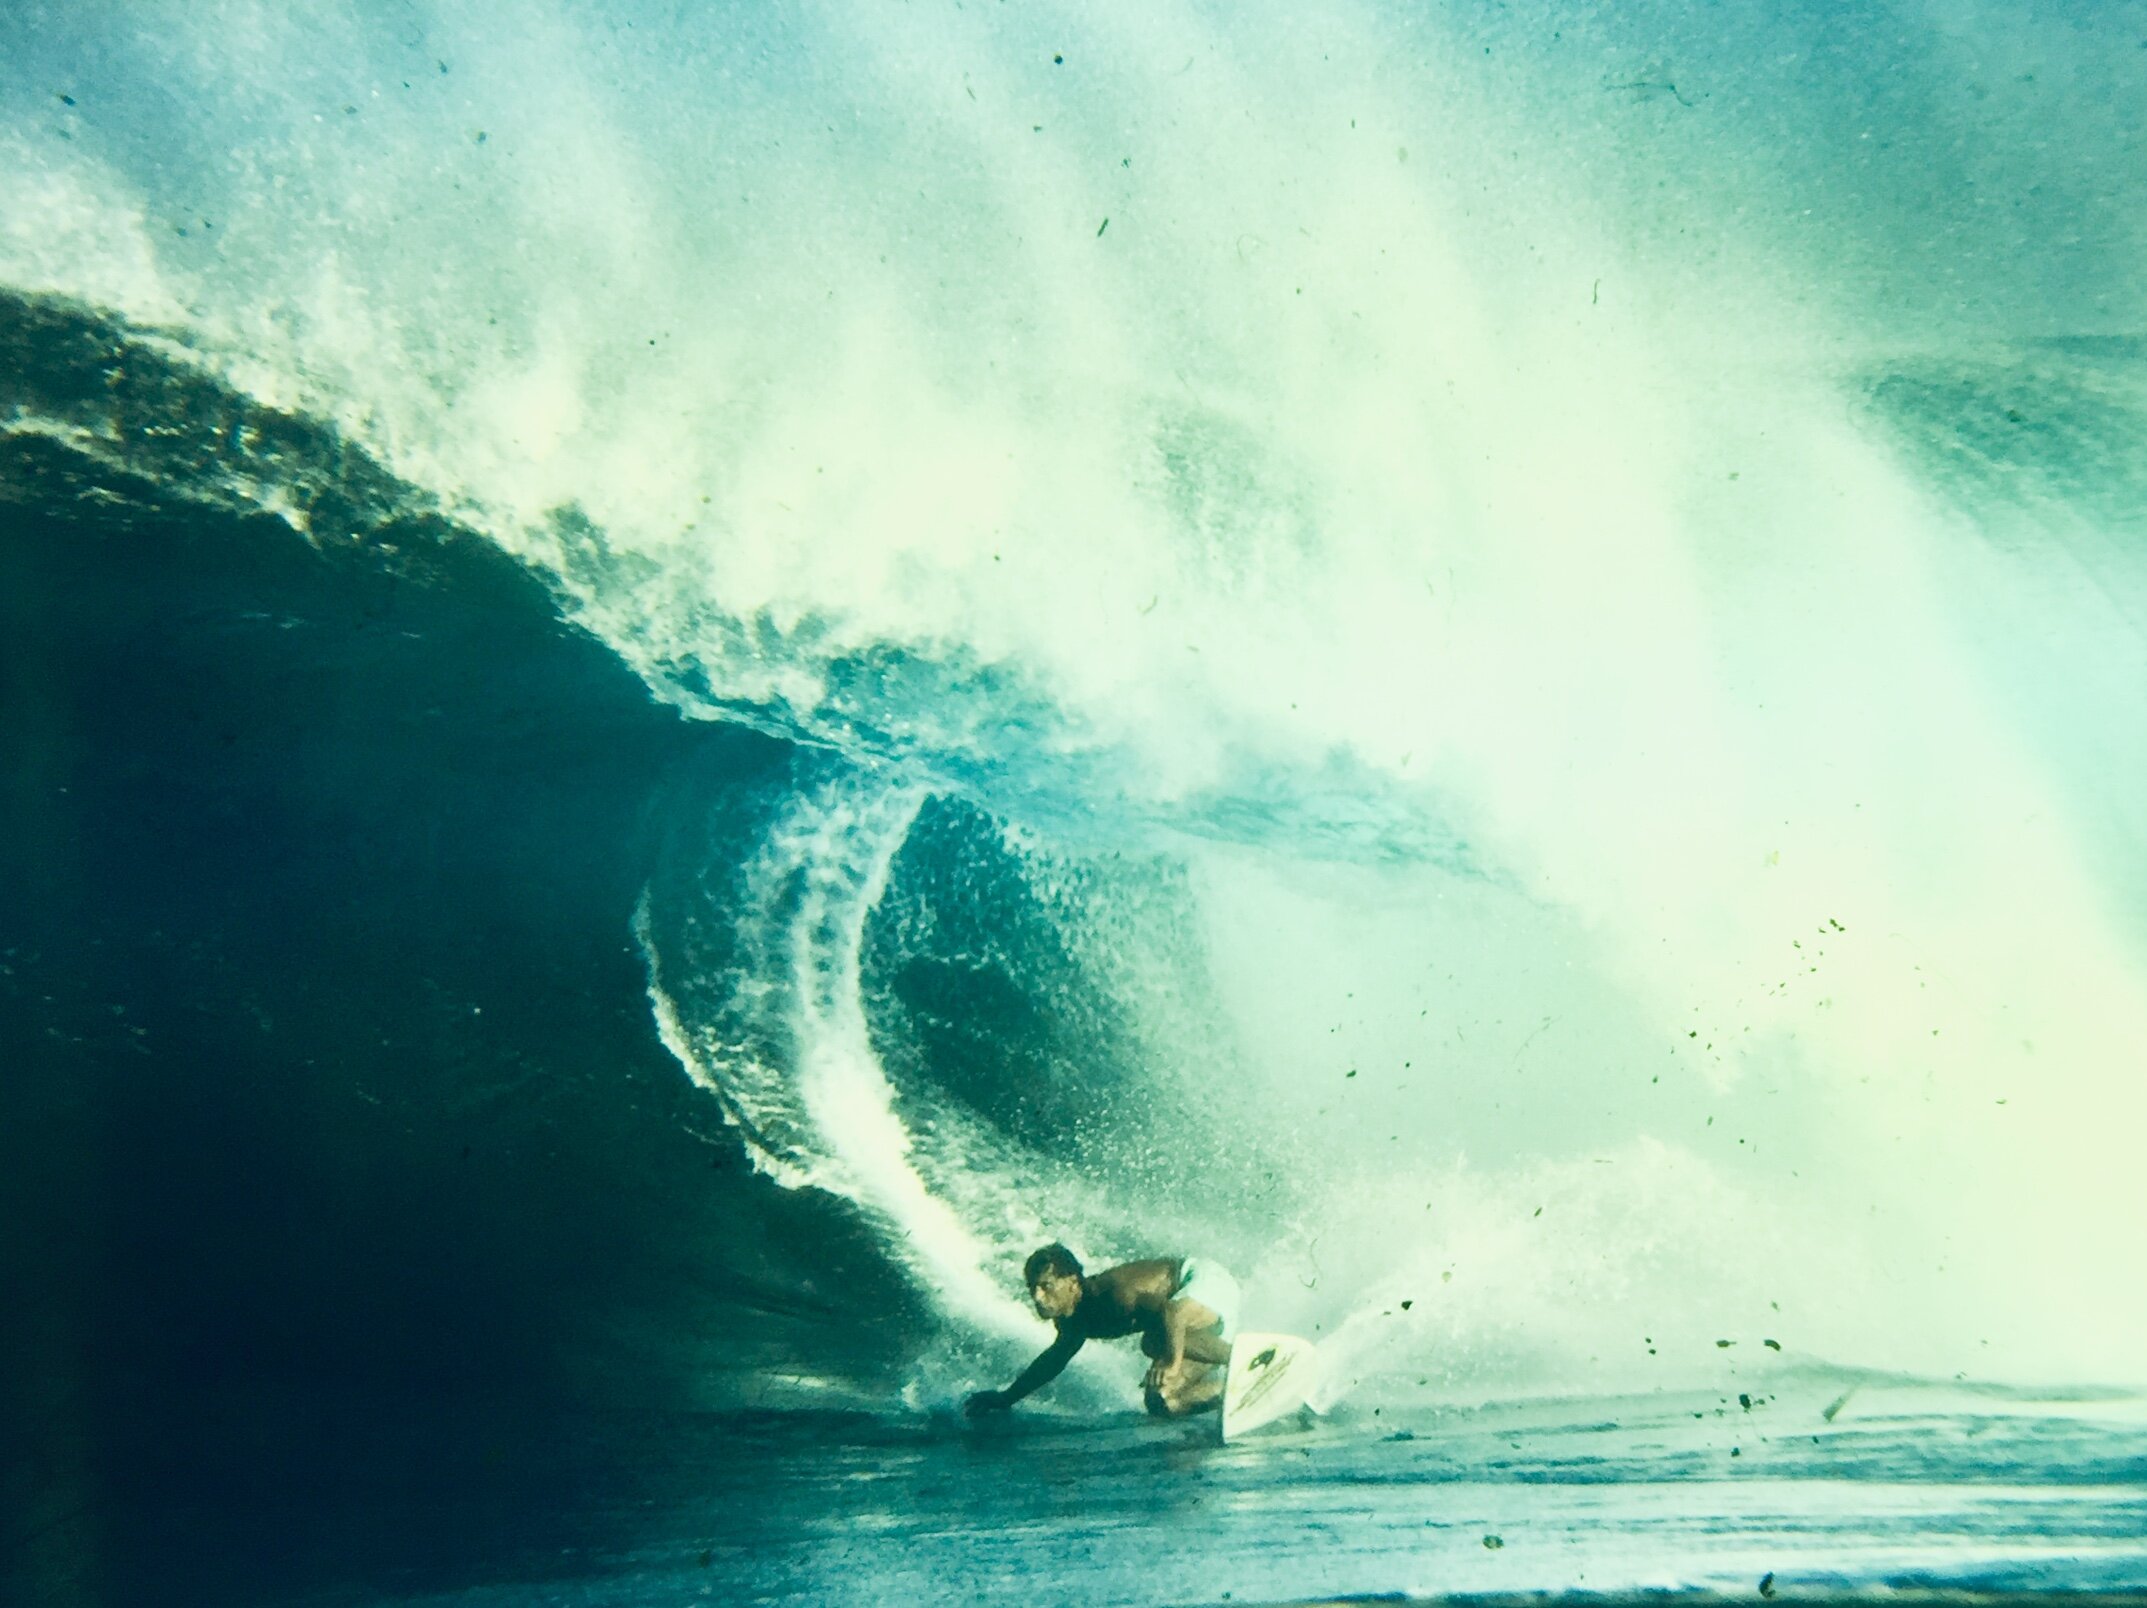  The great Hawaiian Dane Kealoha leaning low into a cavernous Backdoor section  